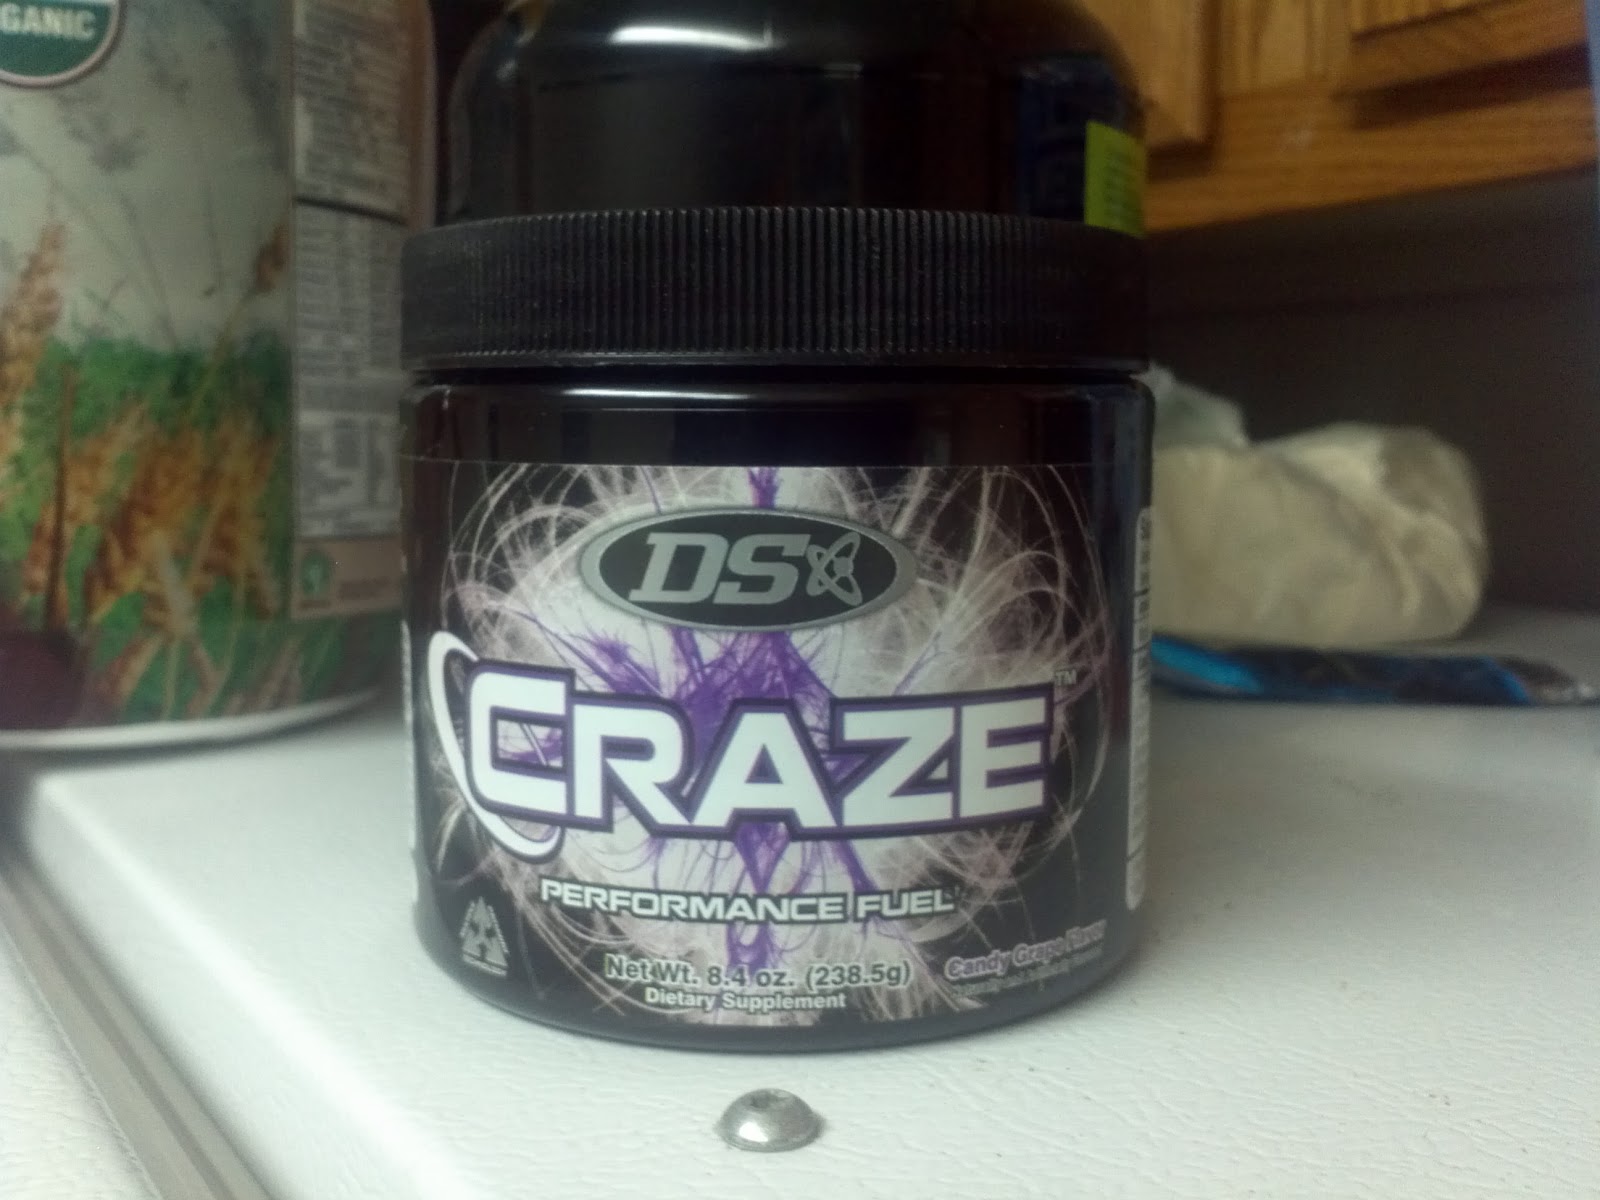 30 Minute Craze pre workout for Weight Loss